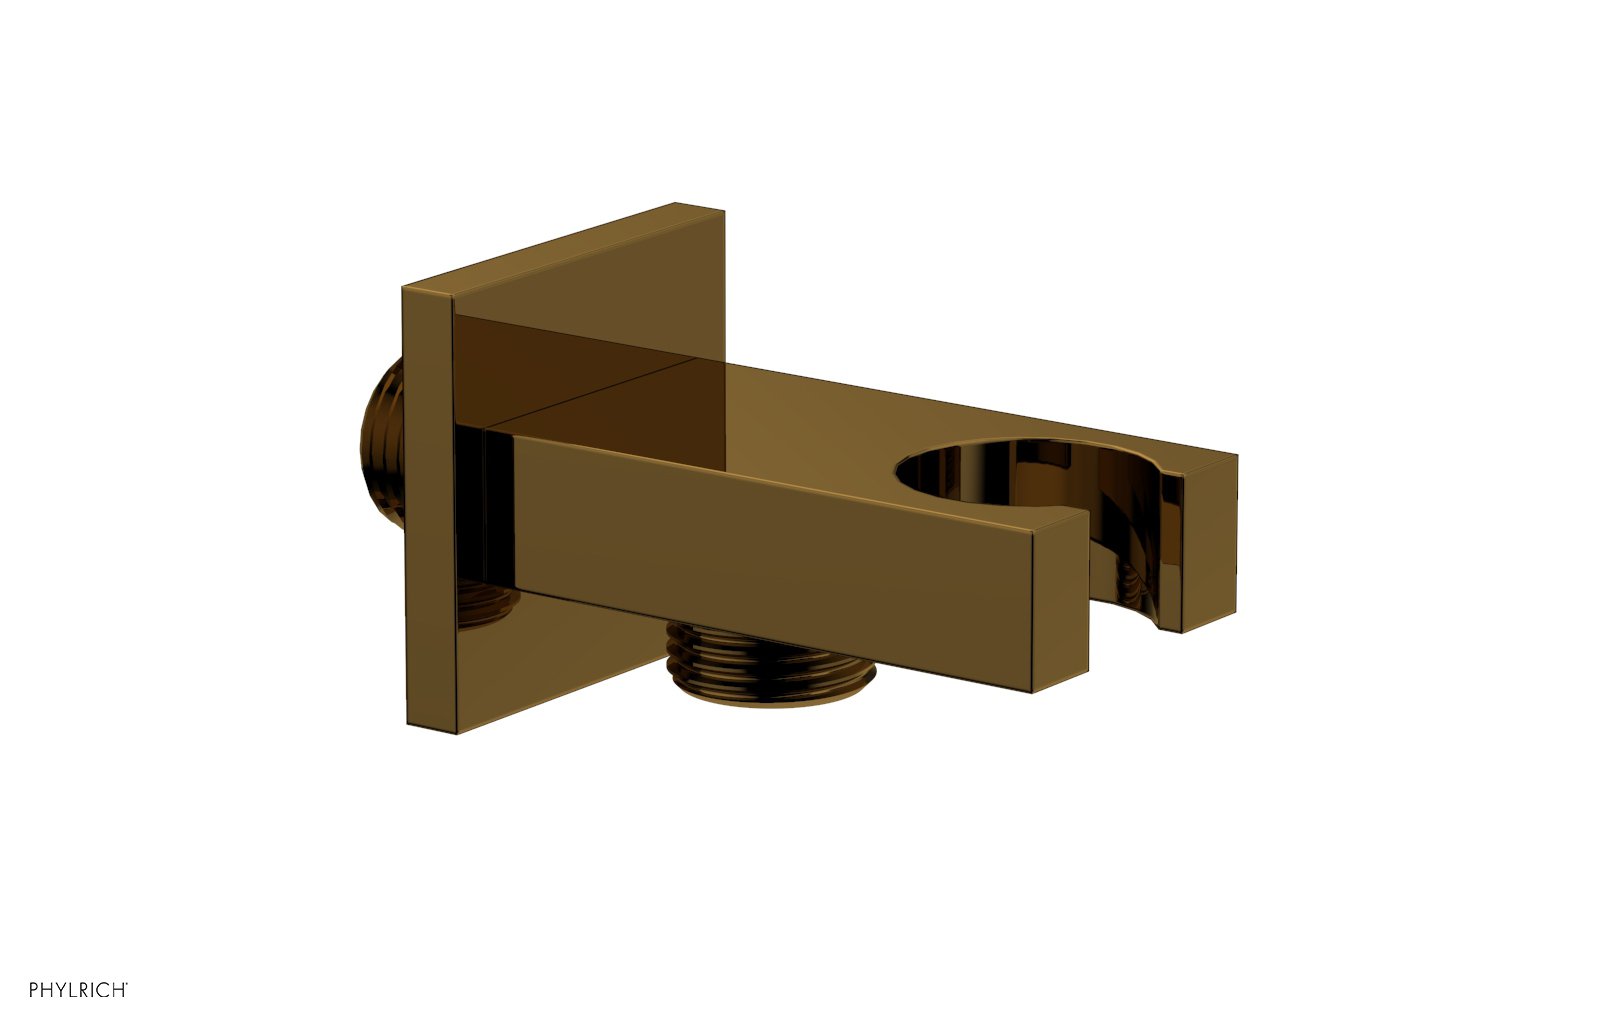 Phylrich Holder and Connector for Hand Shower